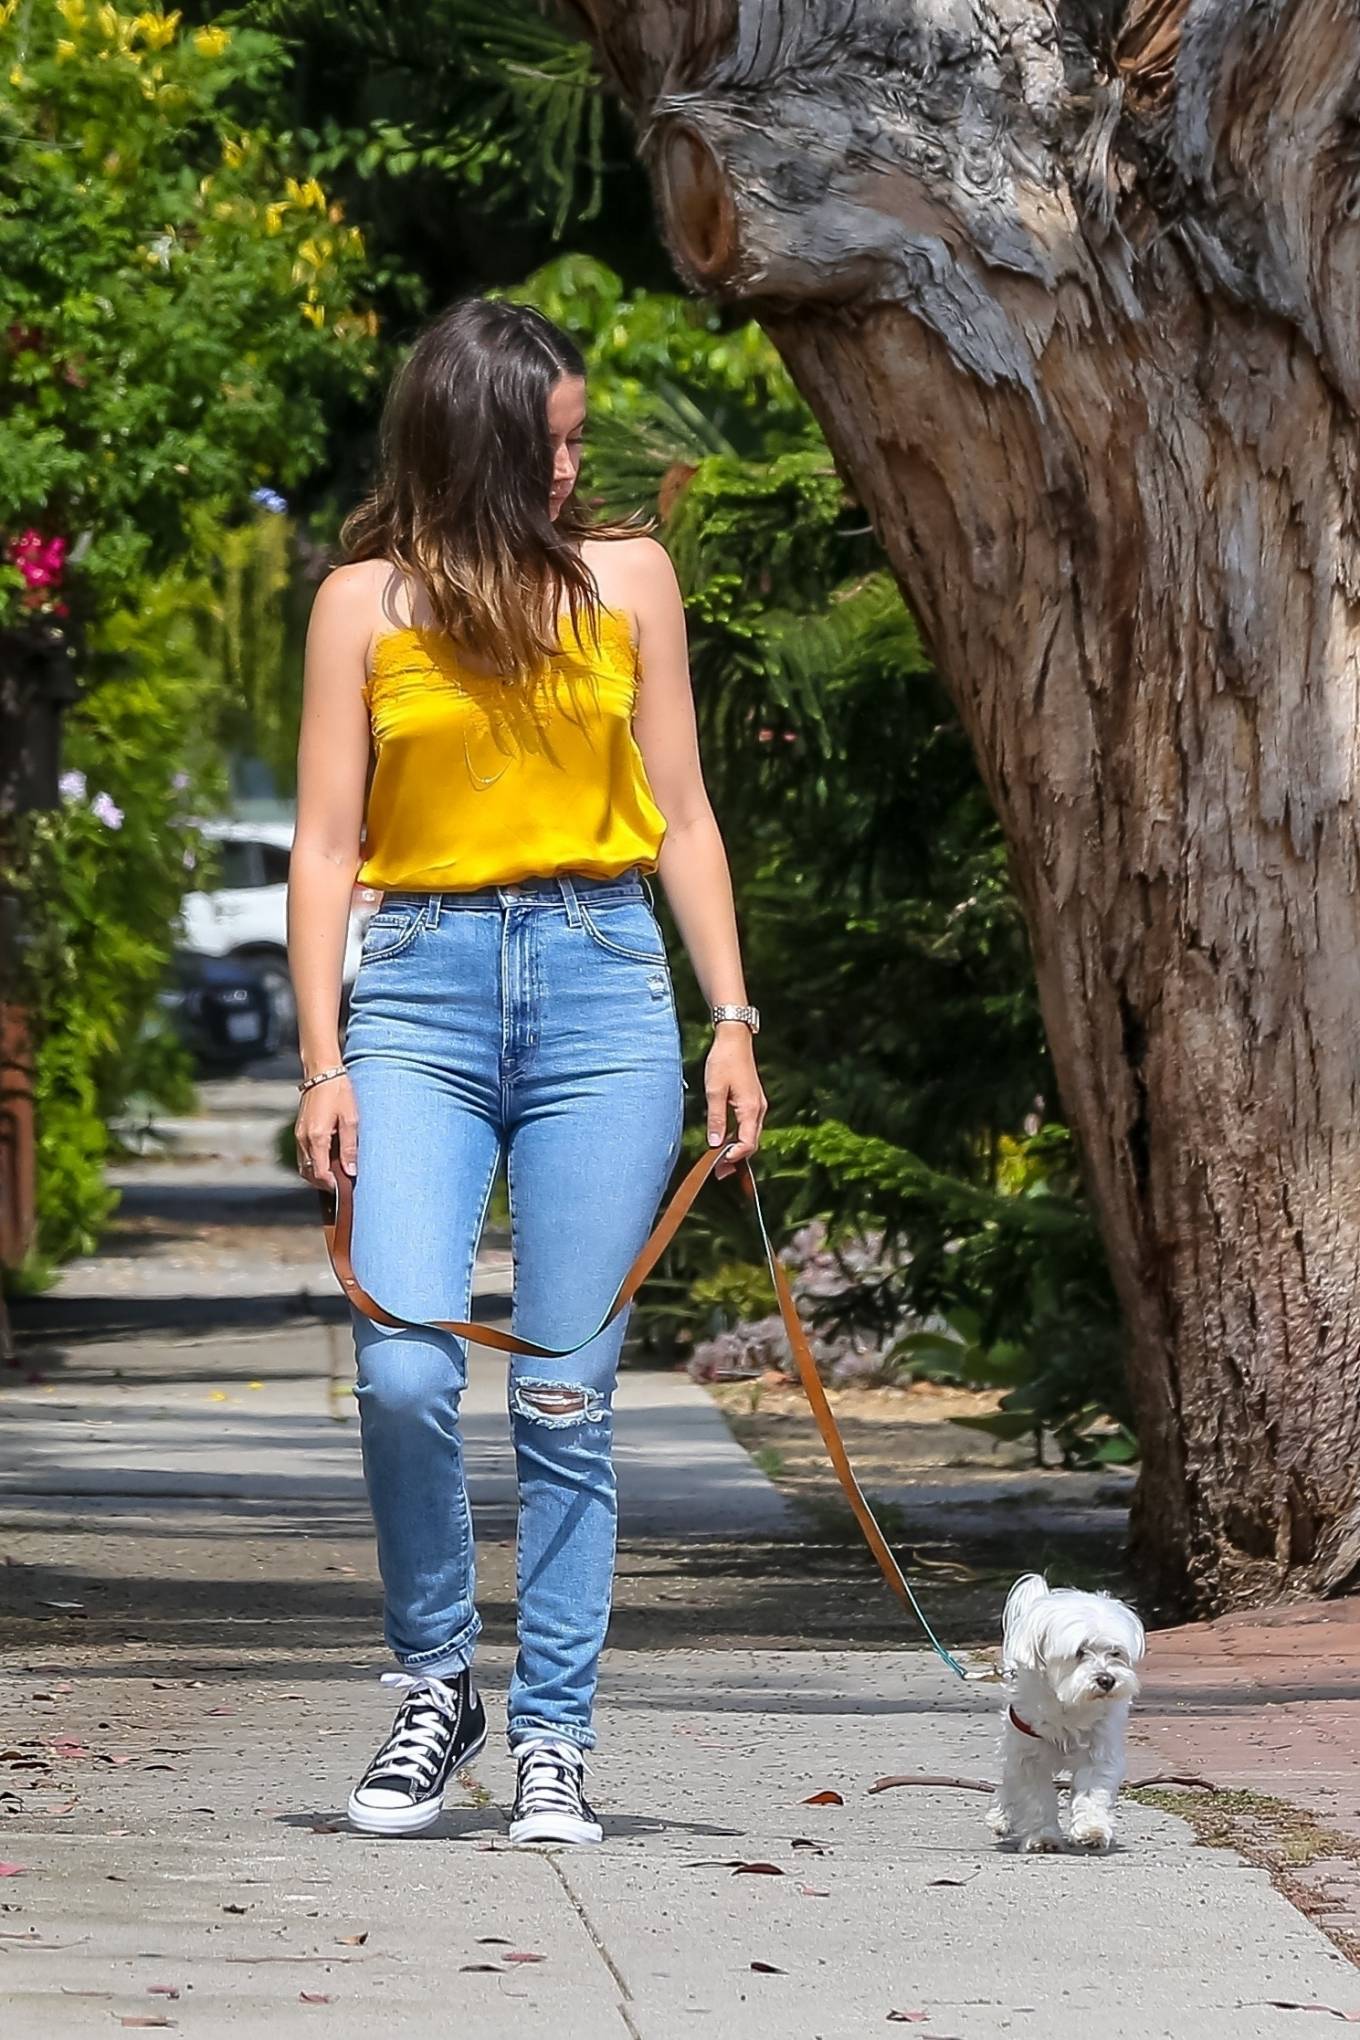 Ana De Armas in Yellow Top out with her dog in Venice-22 | GotCeleb